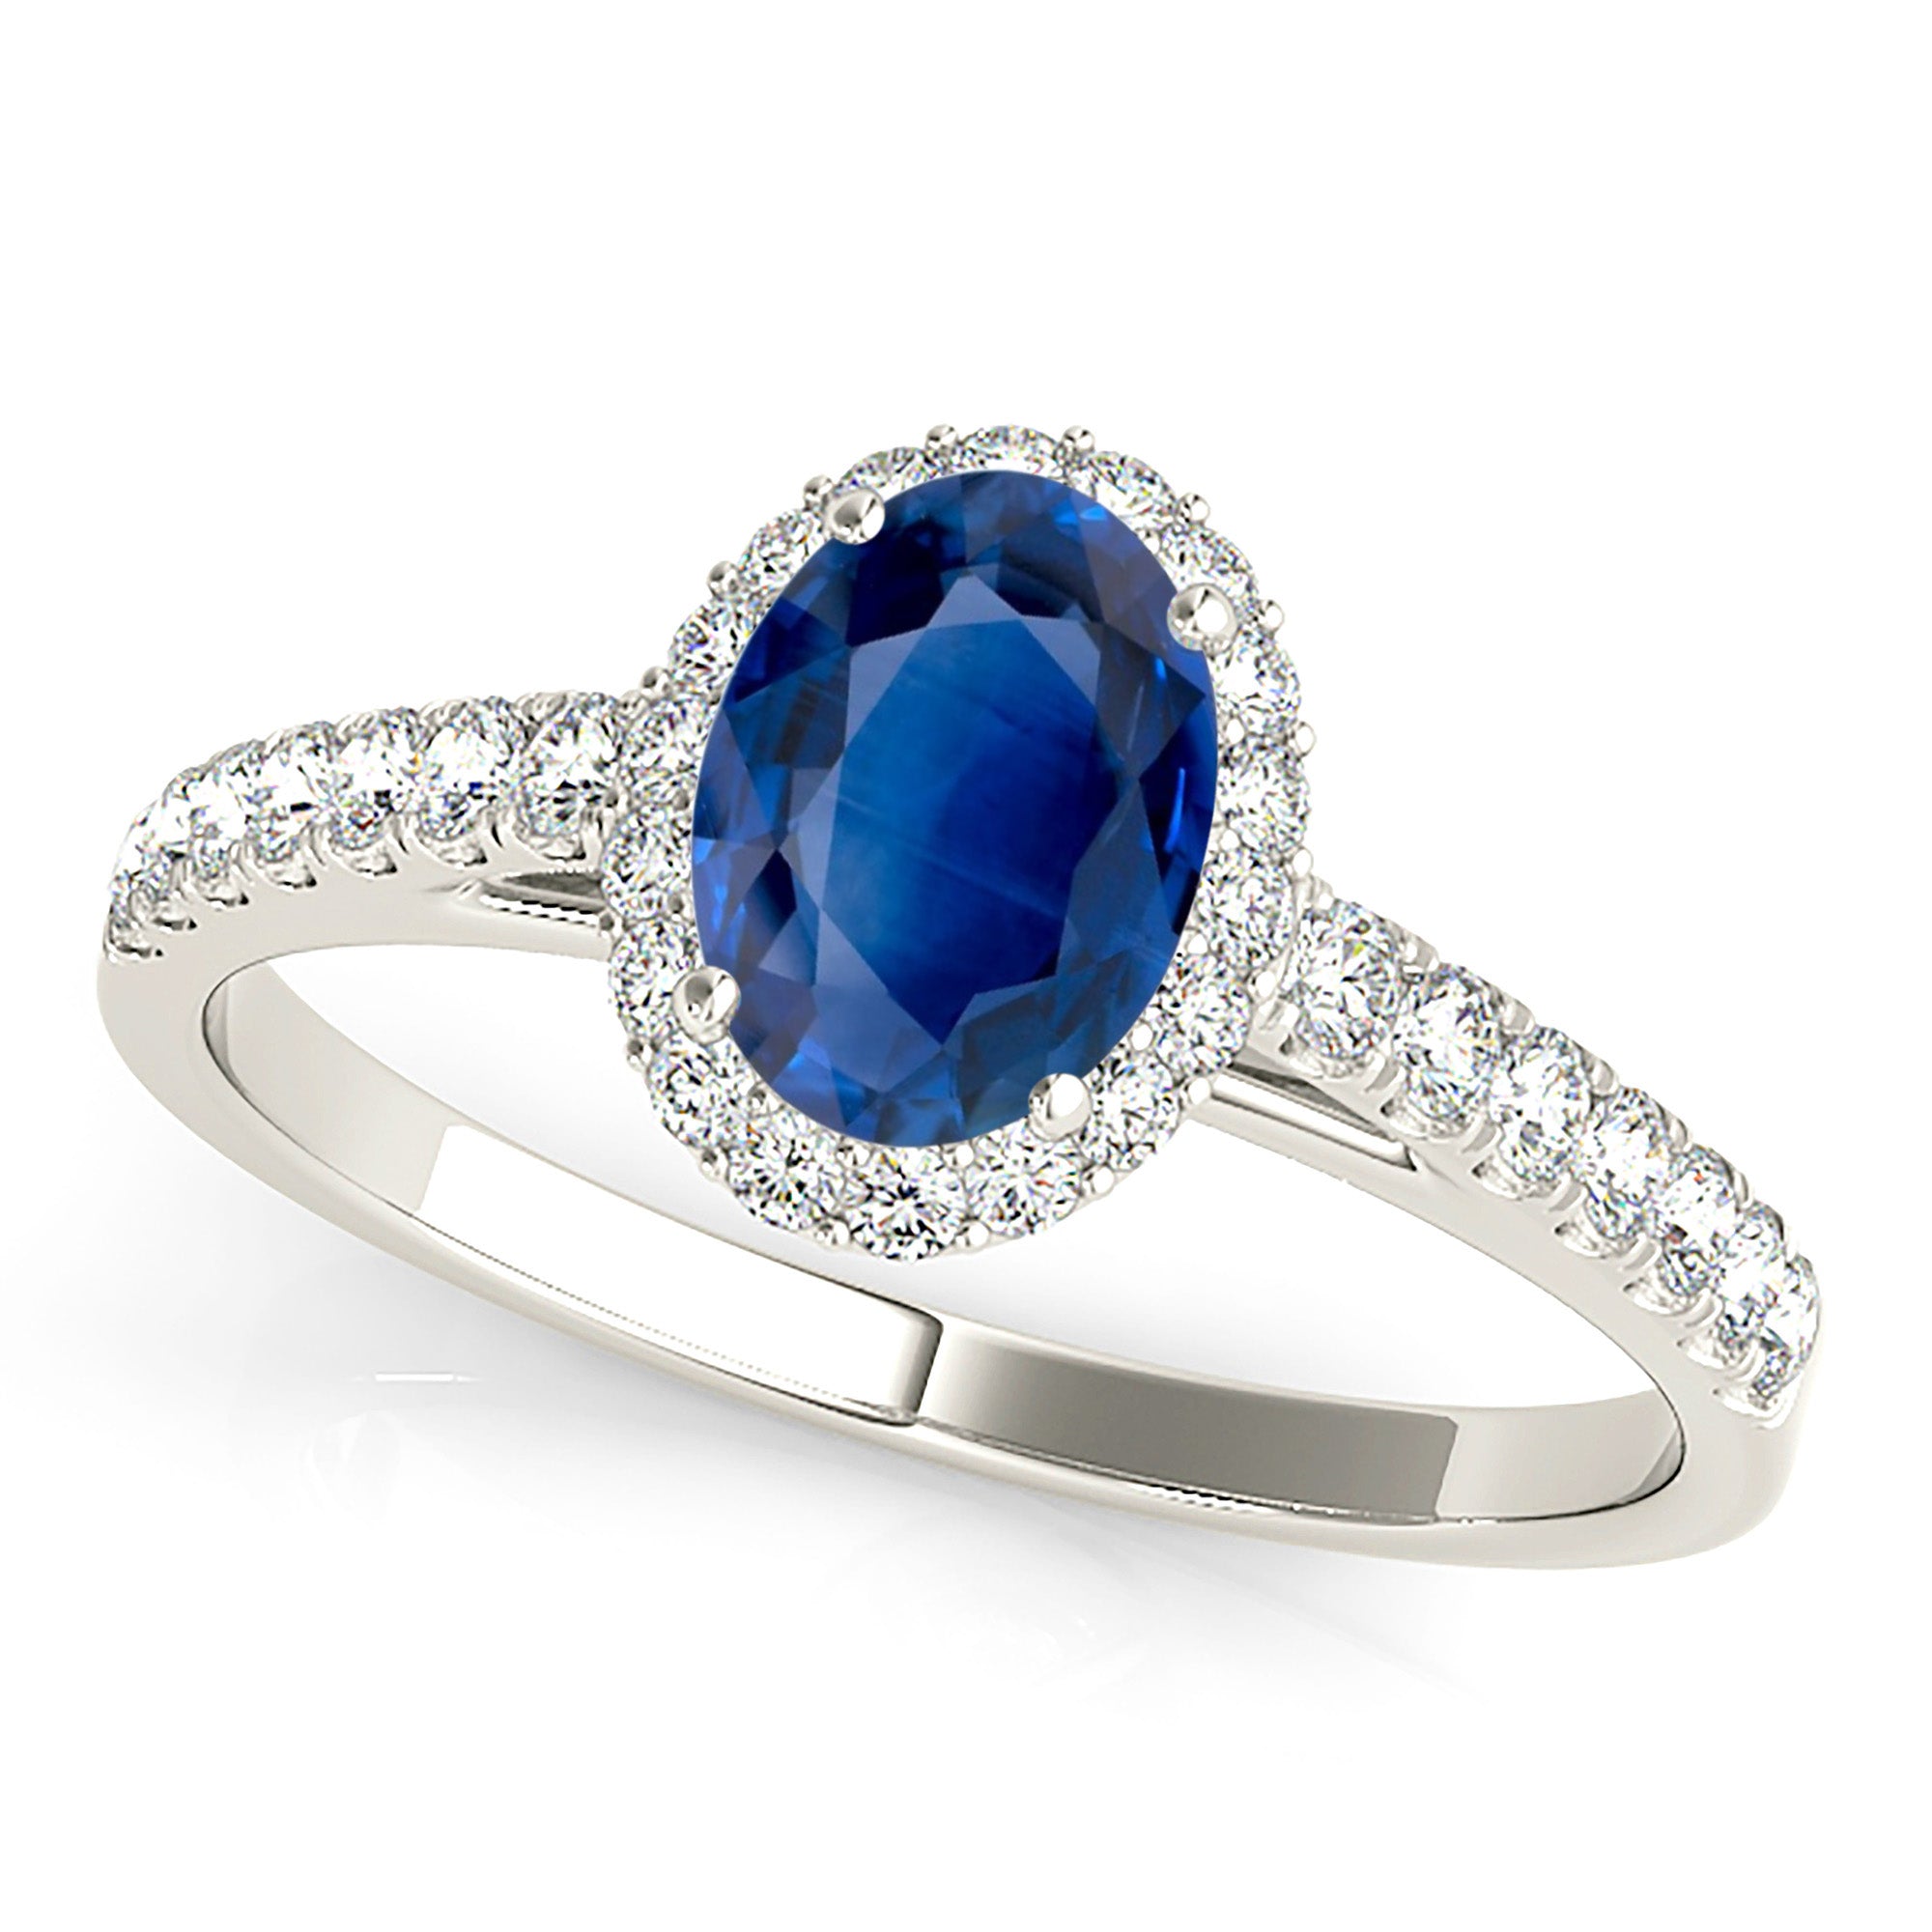 1.51 ct. Genuine Blue Oval Sapphire Ring With 0.25 ctw. Diamond Halo, Dainty Diamond band | Natural Sapphire And Diamond Gemstone Ring-in 14K/18K White, Yellow, Rose Gold and Platinum - Christmas Jewelry Gift -VIRABYANI